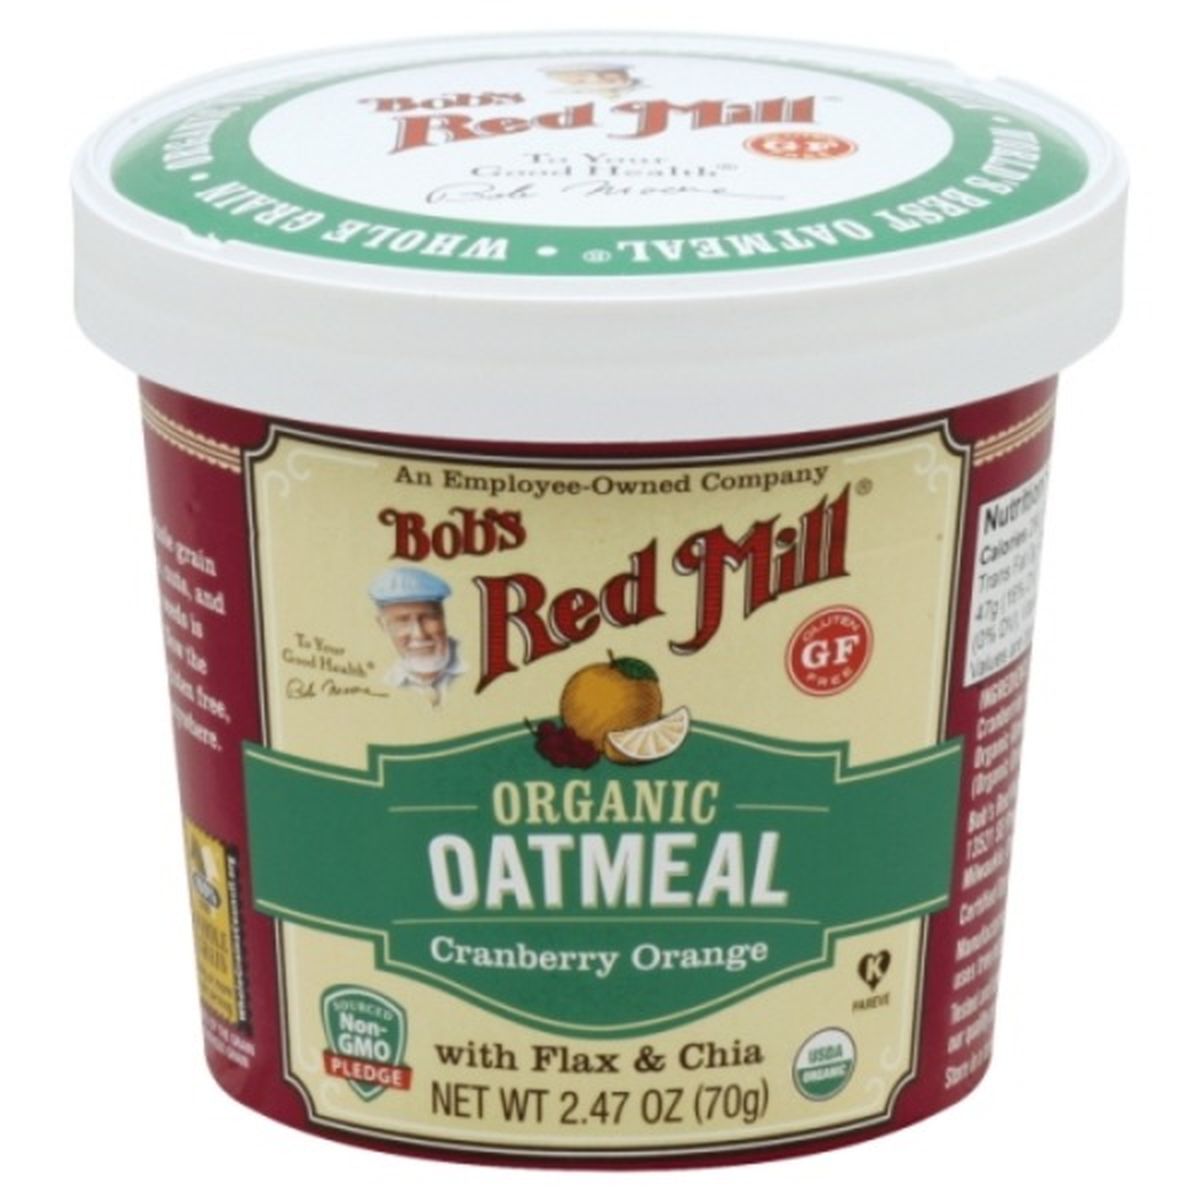 Calories in Bob's Red Mill Oatmeal, Organic, Cranberry Orange